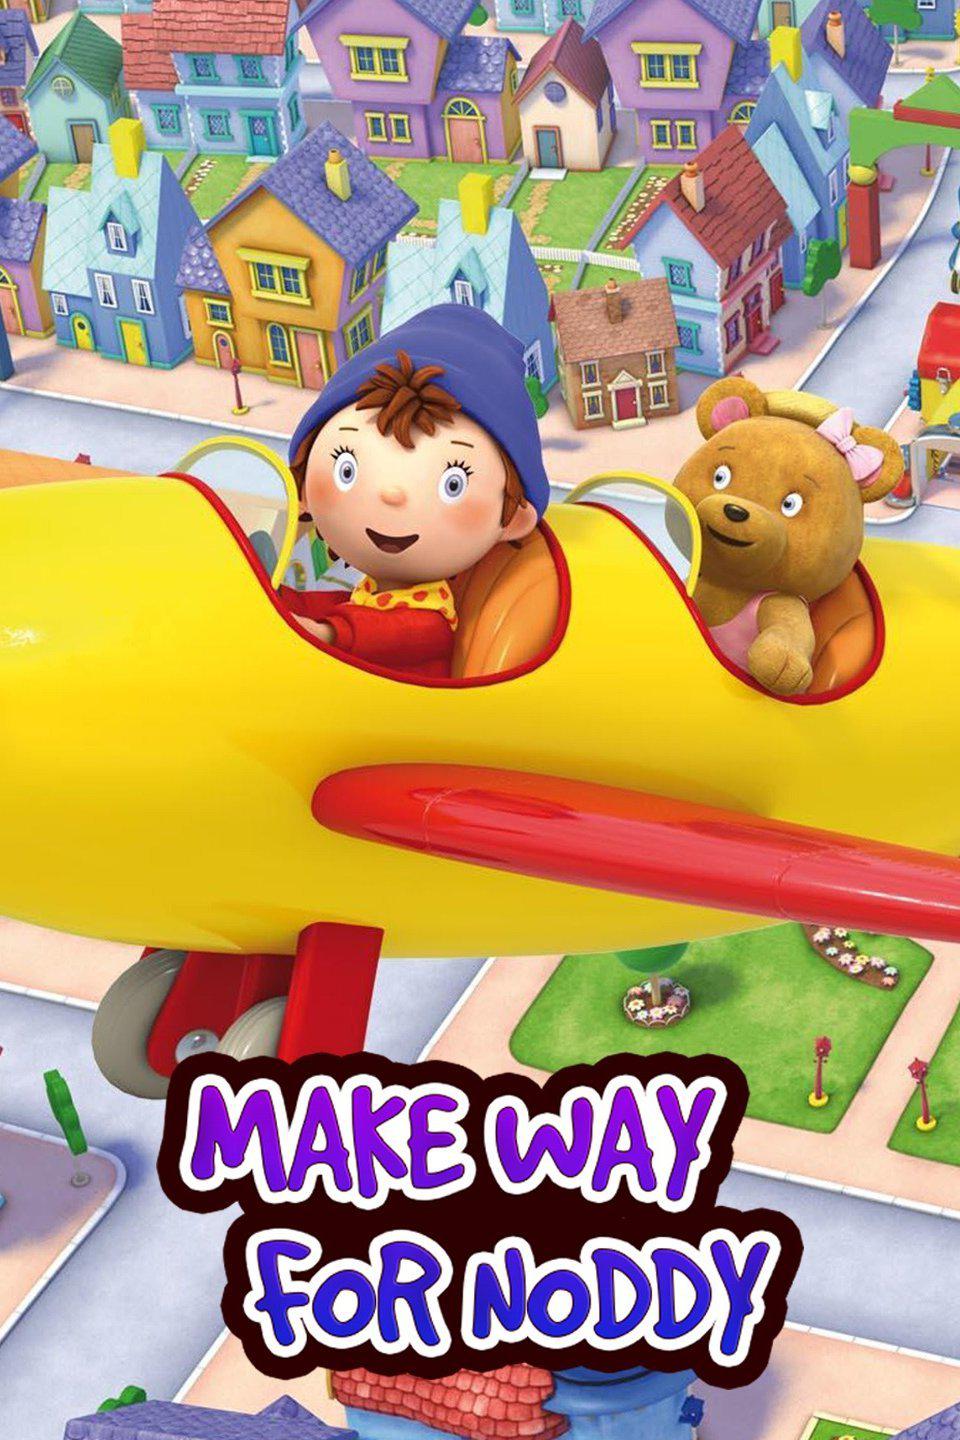 TV ratings for Make Way For Noddy in France. PBS Kids TV series